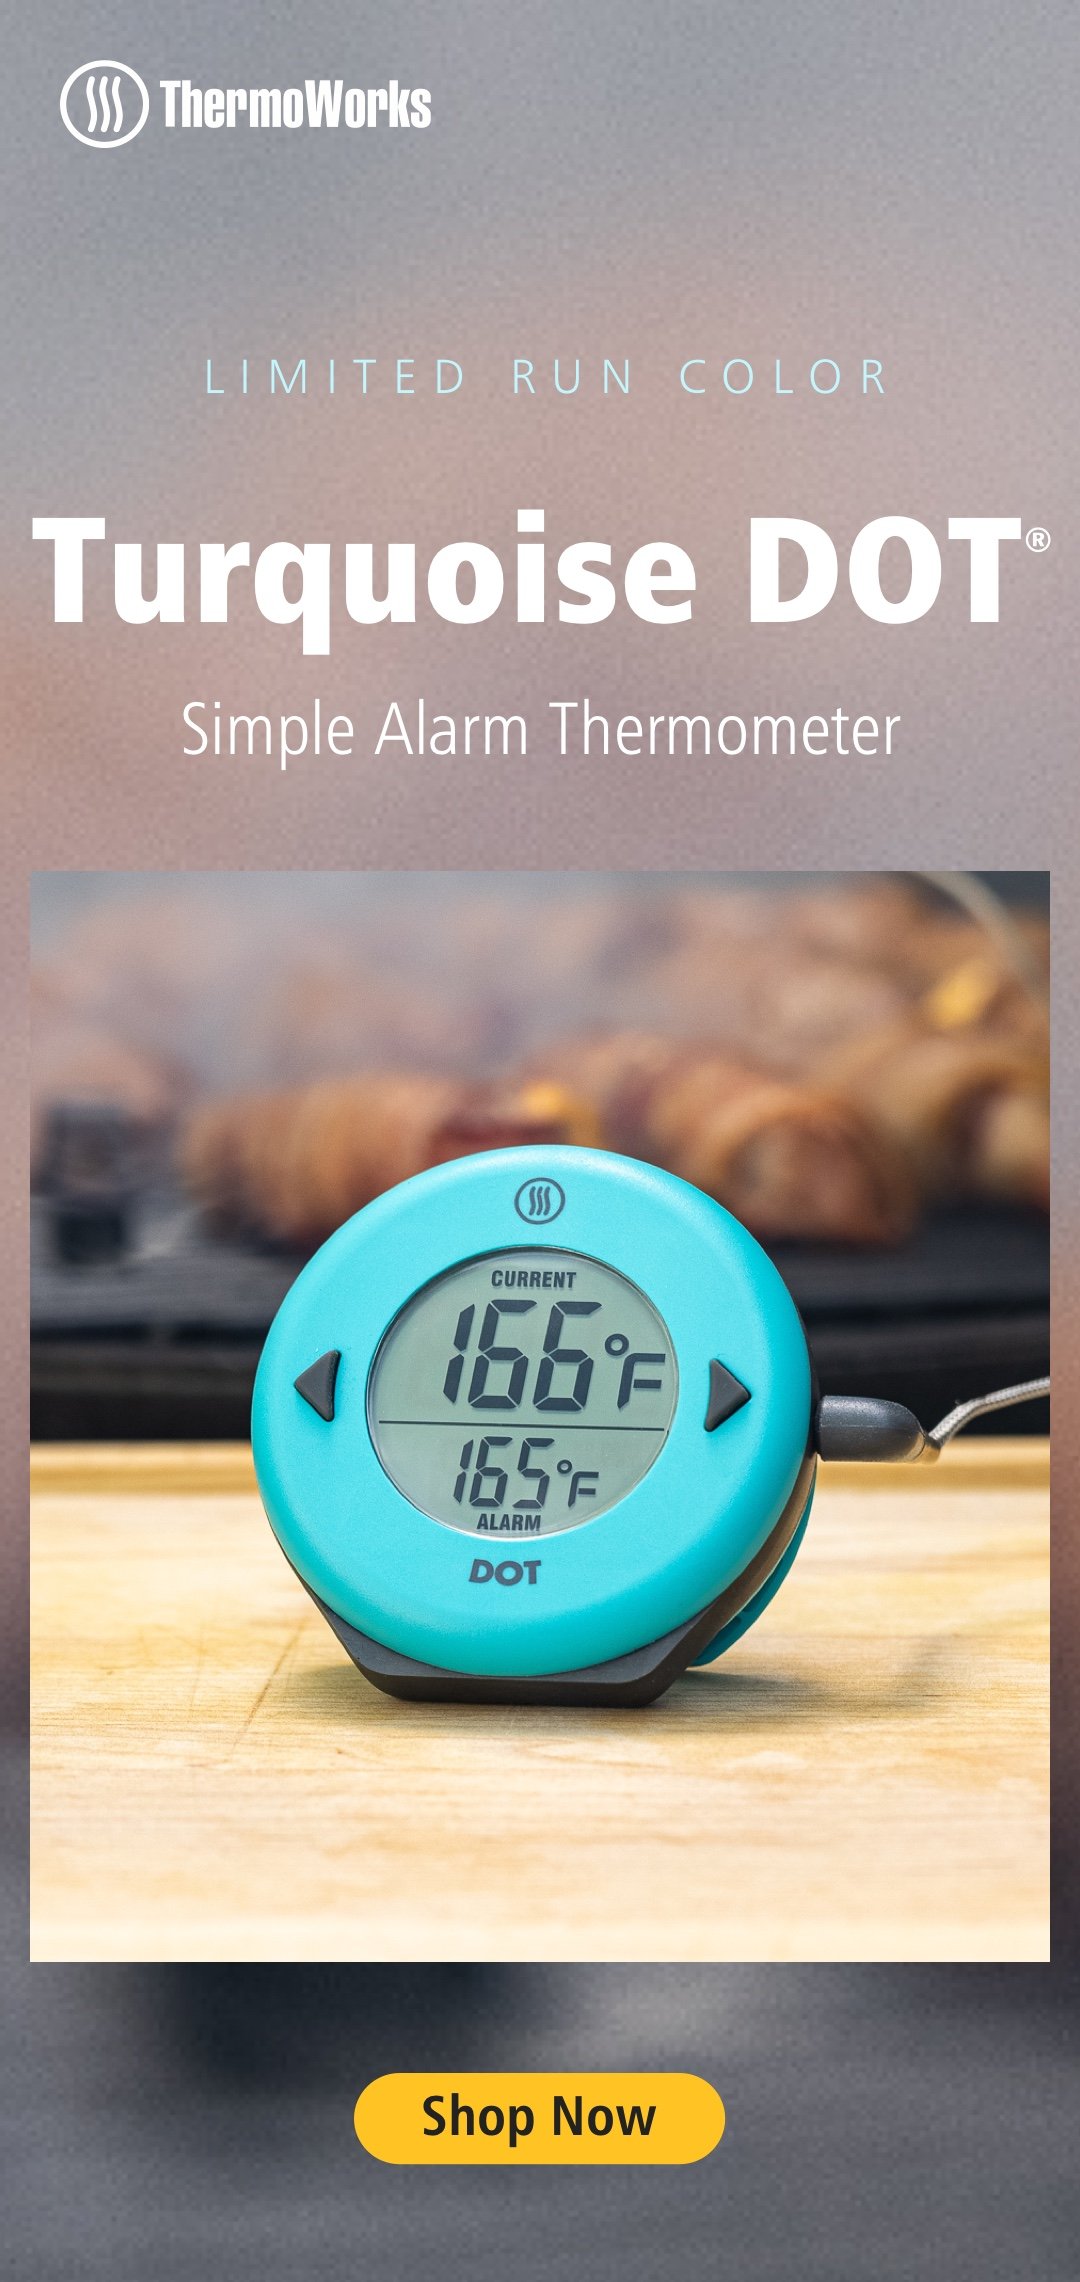 ThermoWorks: New Limited Turquoise DOT Alarm Thermometer